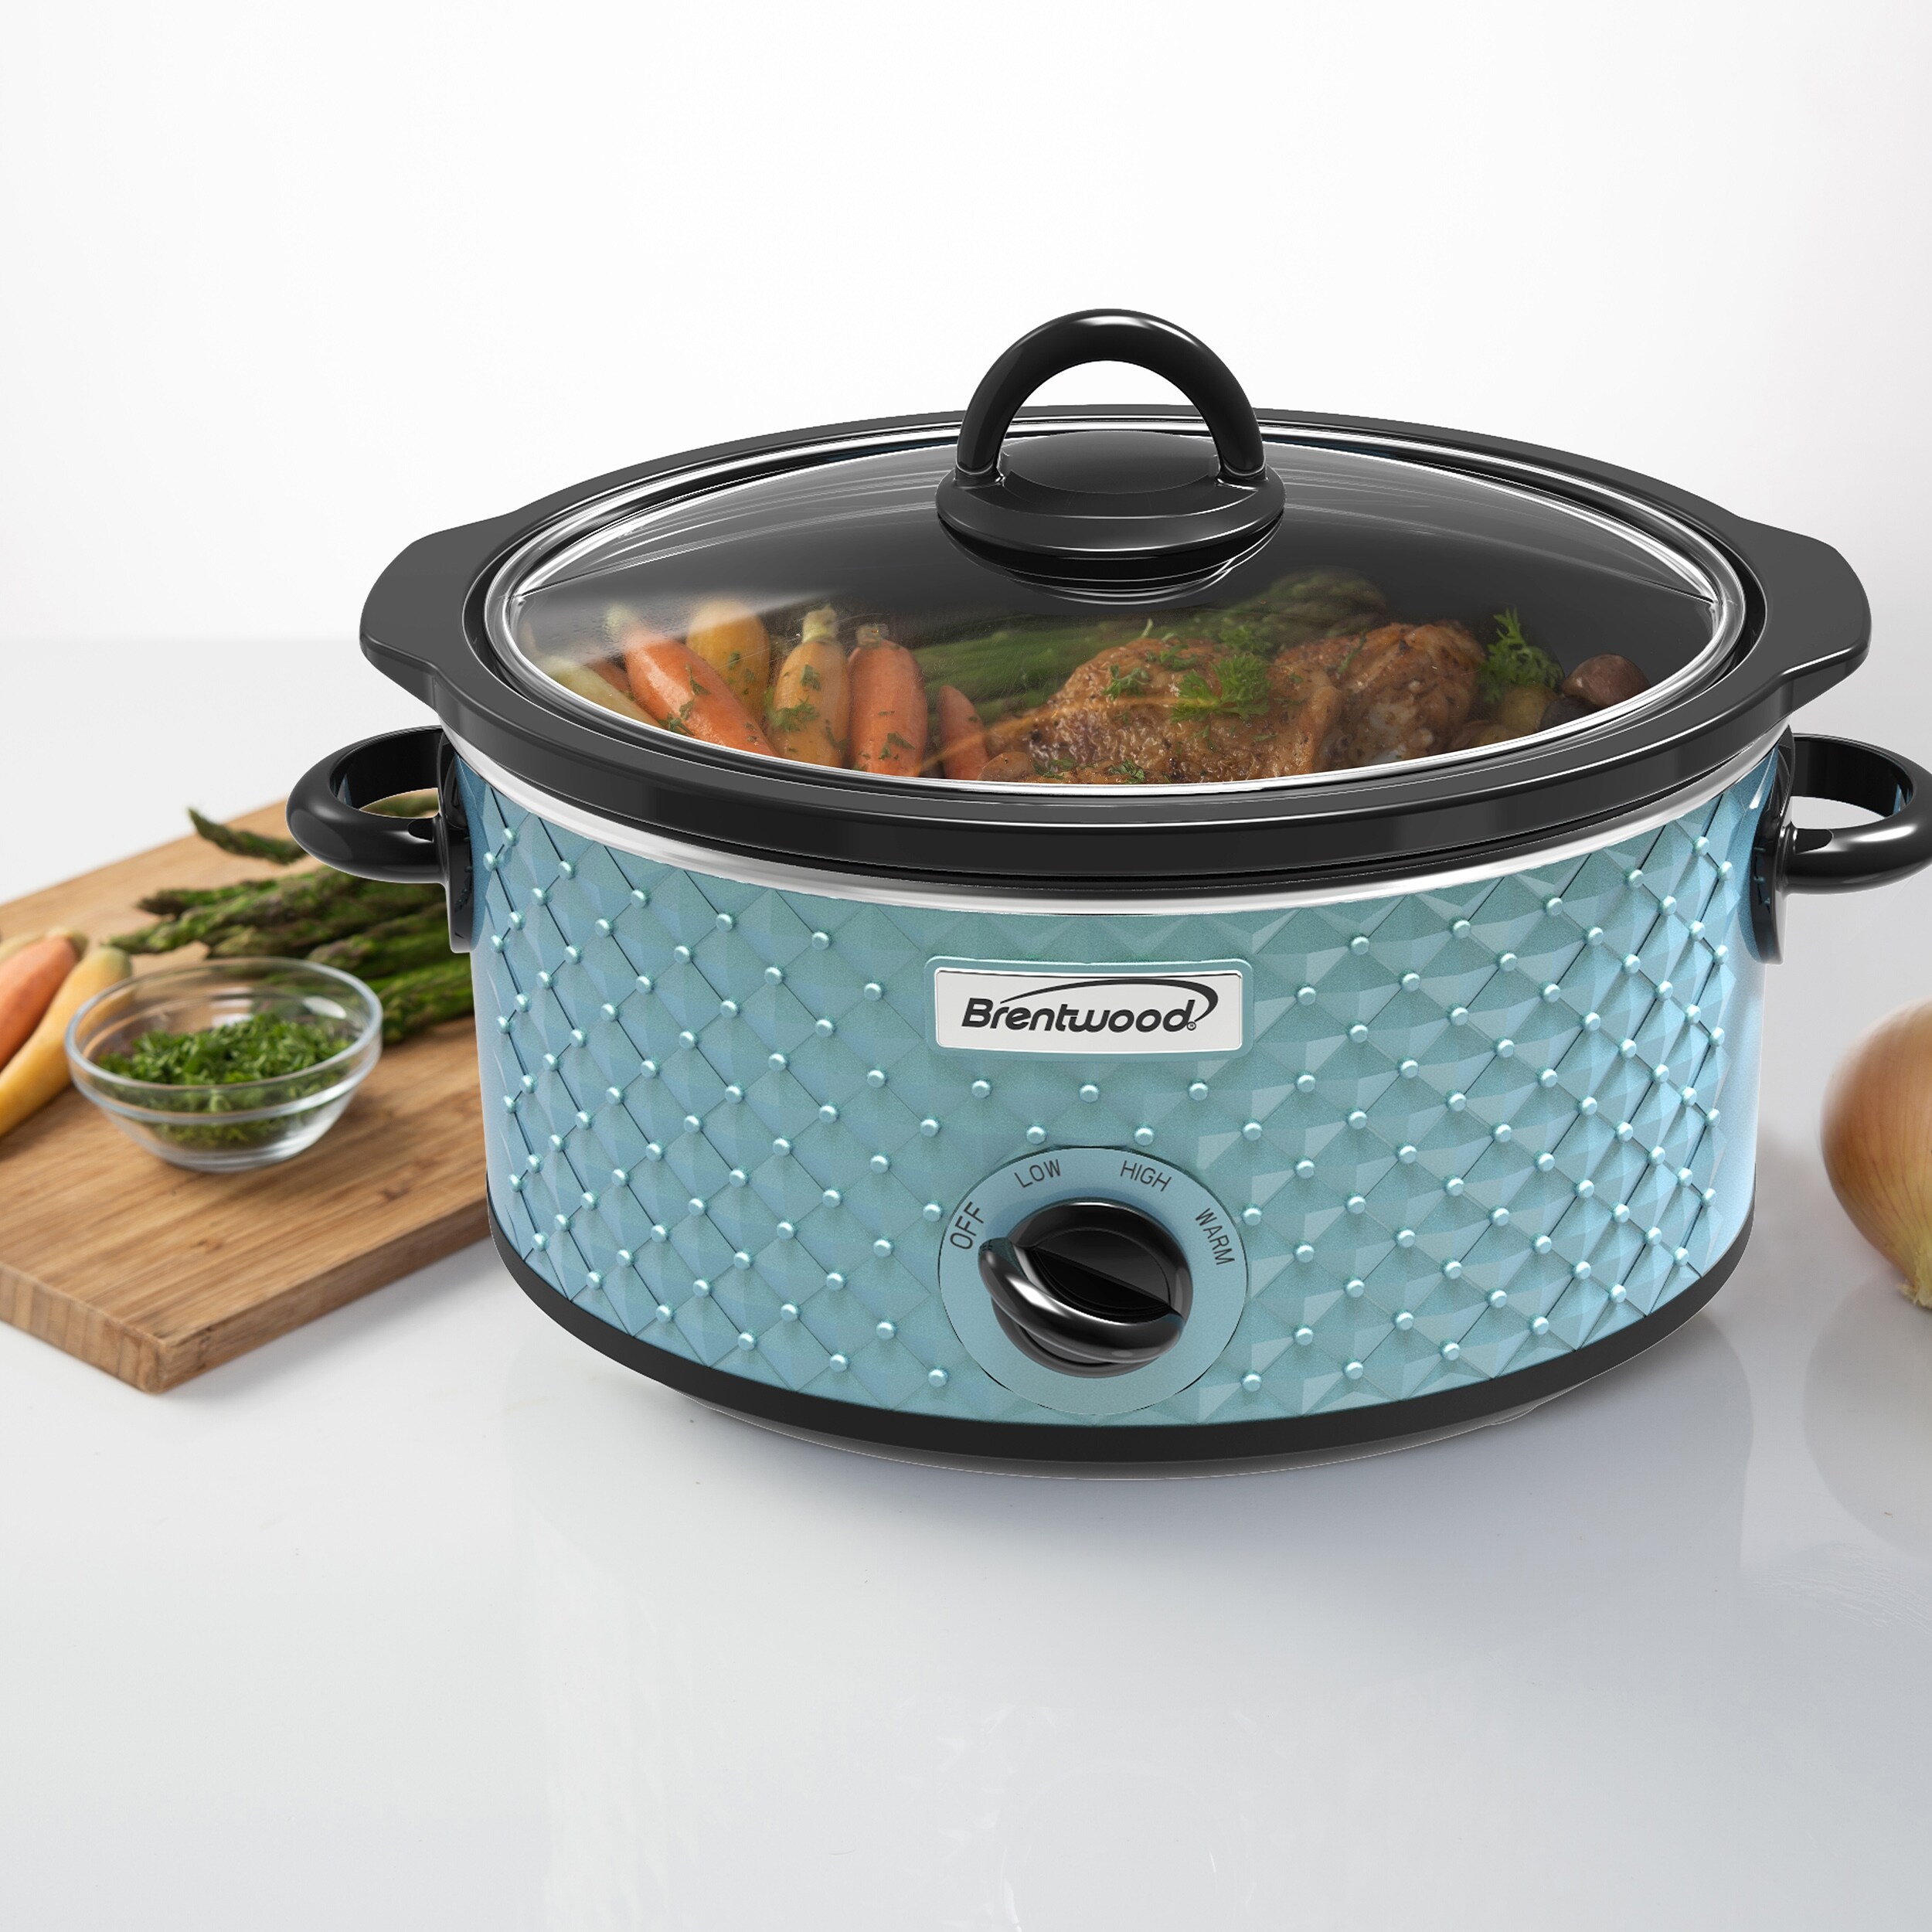 https://ak1.ostkcdn.com/images/products/is/images/direct/87c5d67eb9e510bff2ae778ec65d7458d1afbe07/14-Cup-Argyle-Slow-Cooker-in-Turquoise.jpg